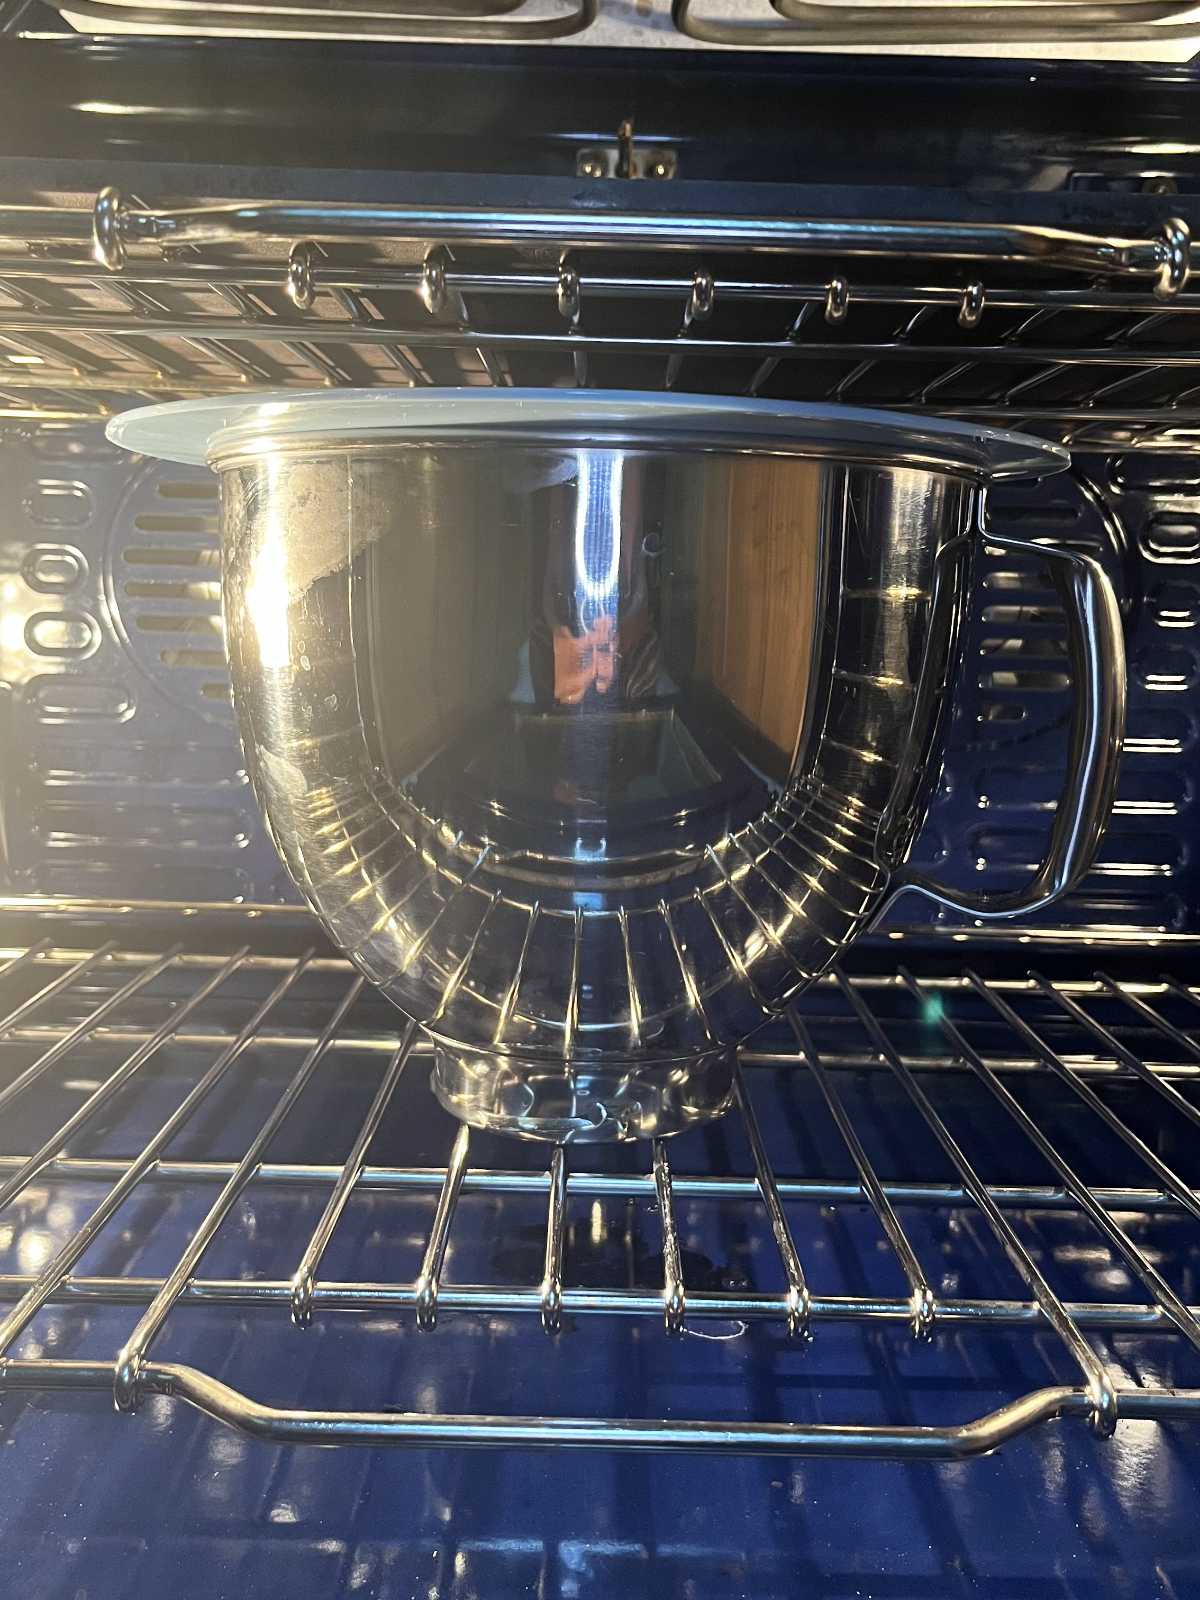 Stand mixer bowl in an oven with a blue silicone lid.